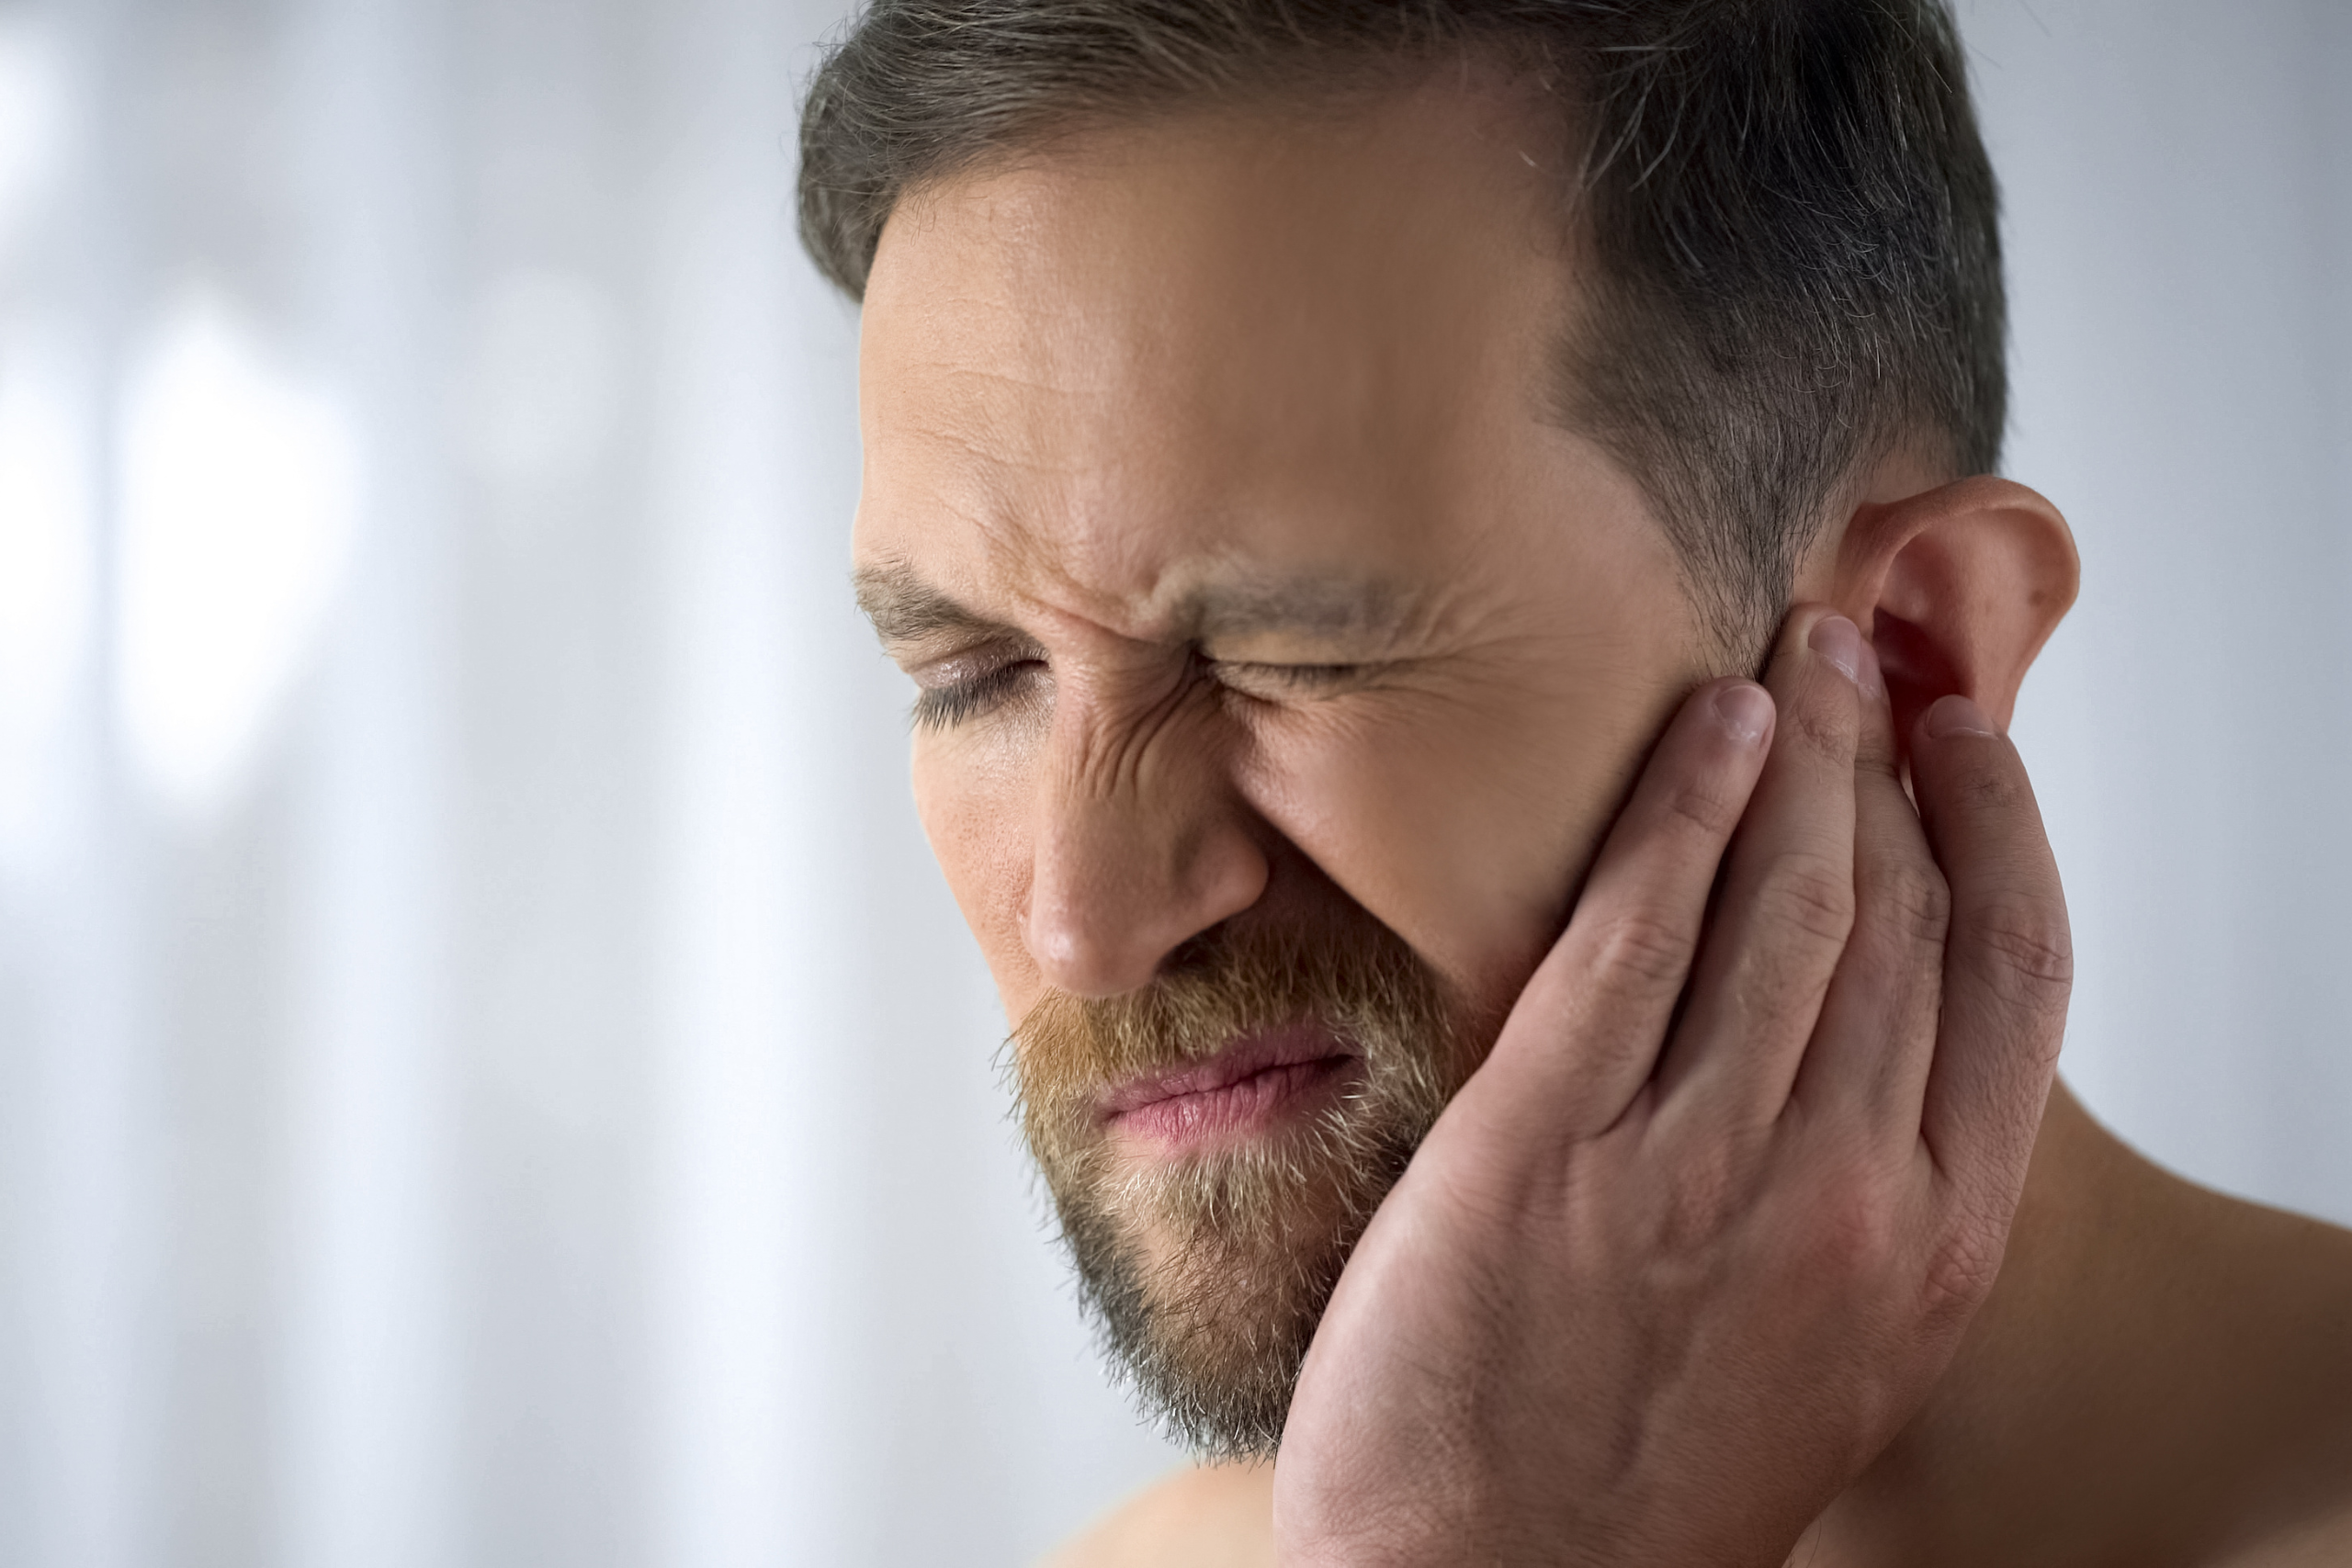 Man suffering from hearing loss